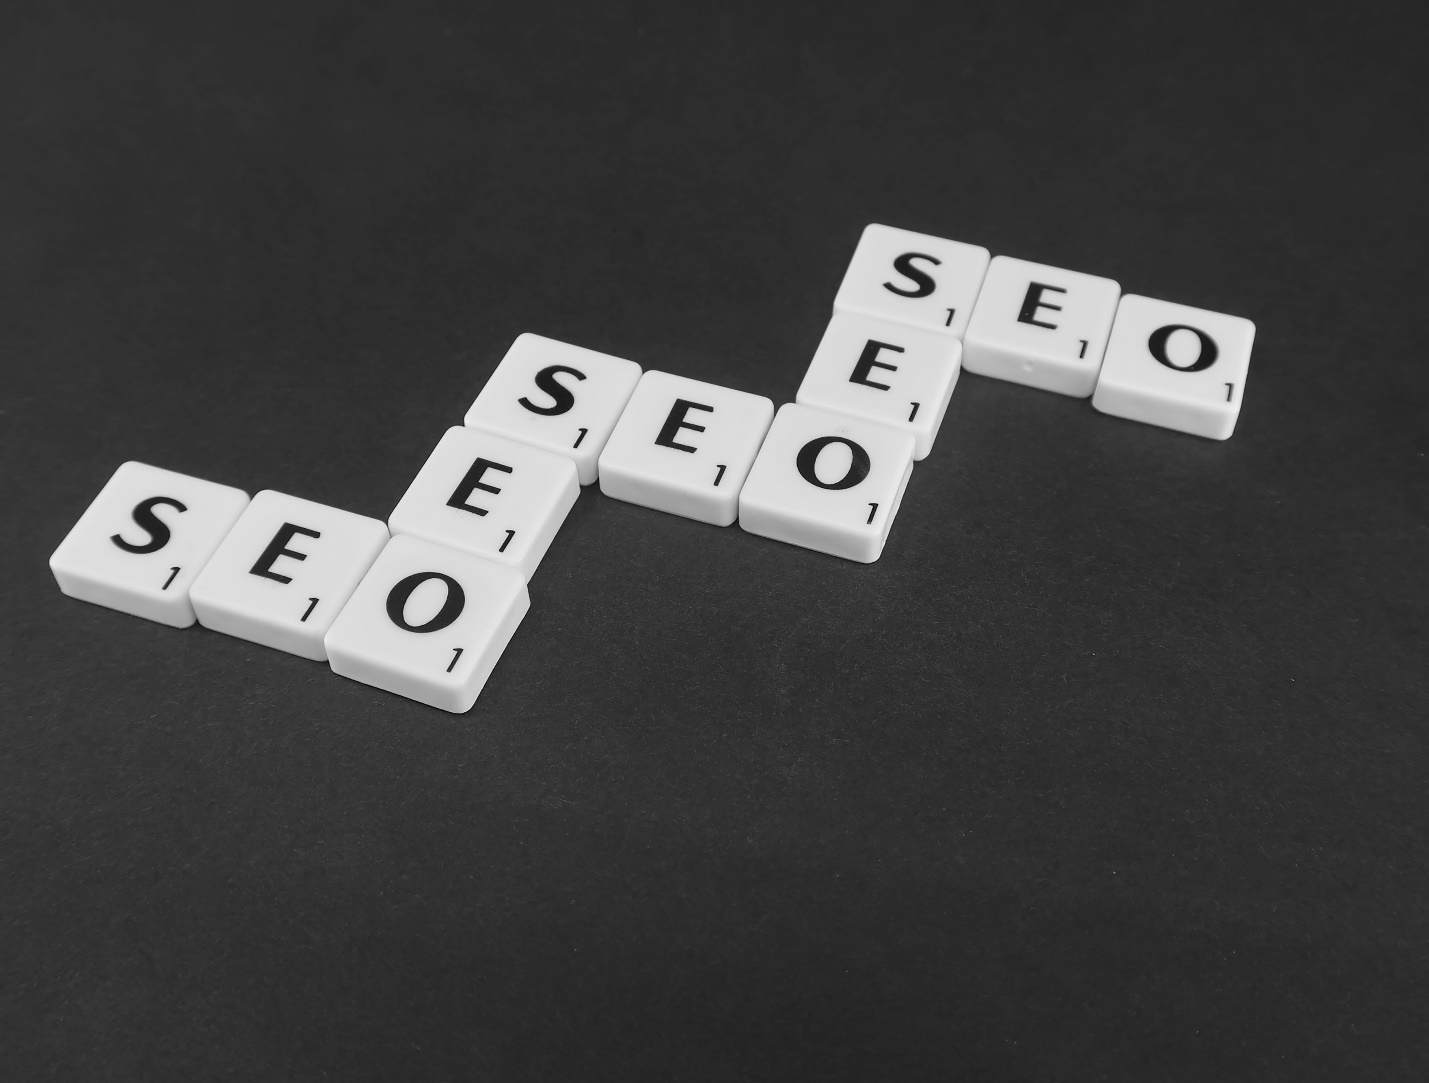 SEO services for websites for a small business.